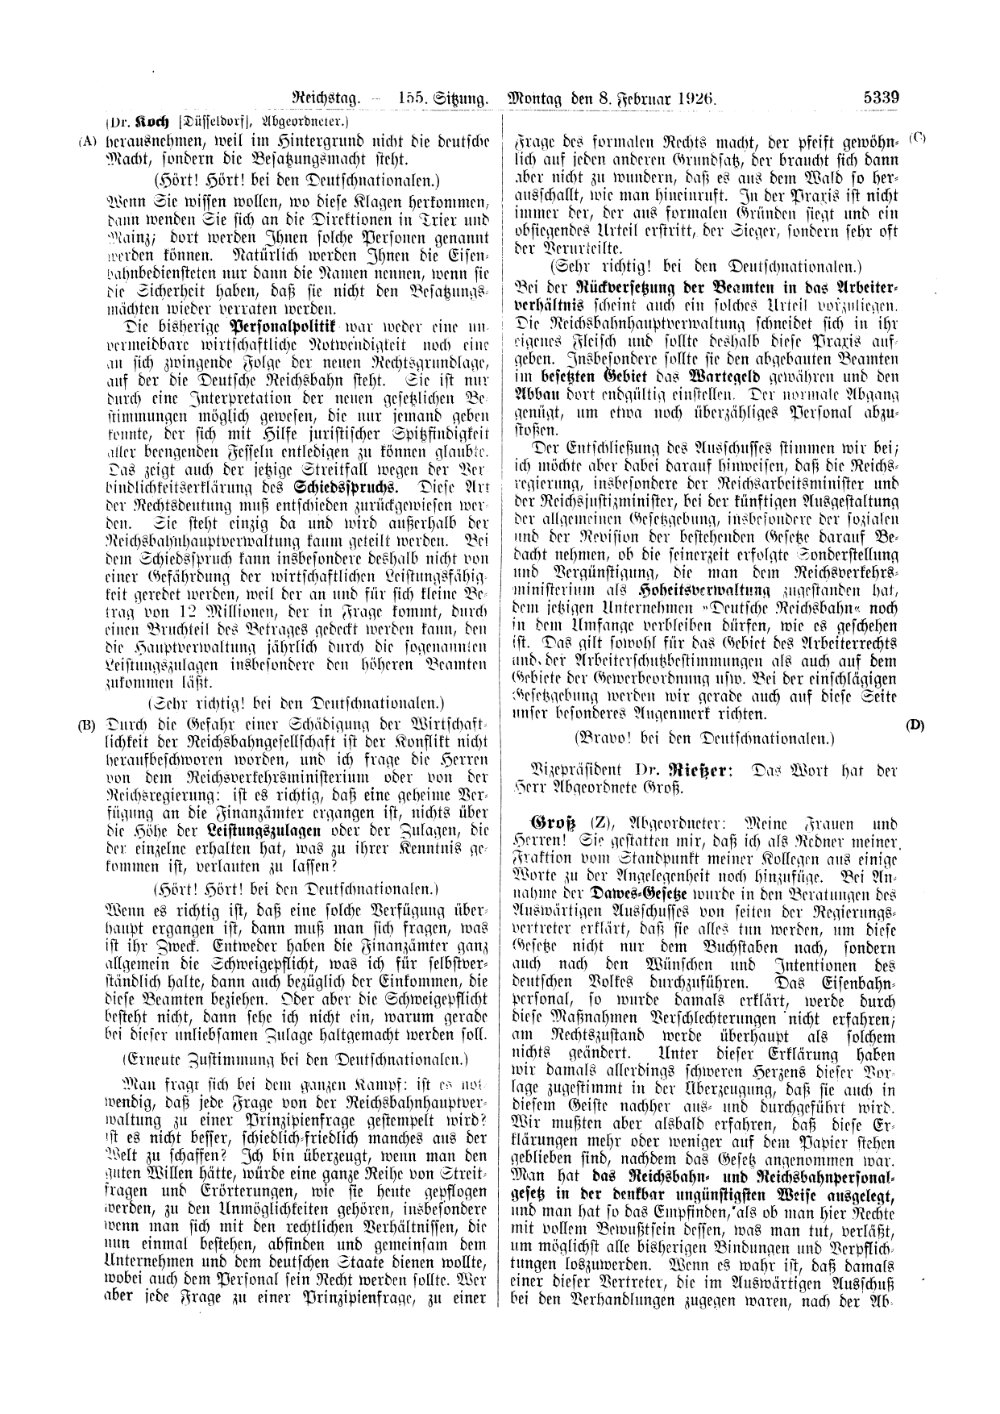 Scan of page 5339